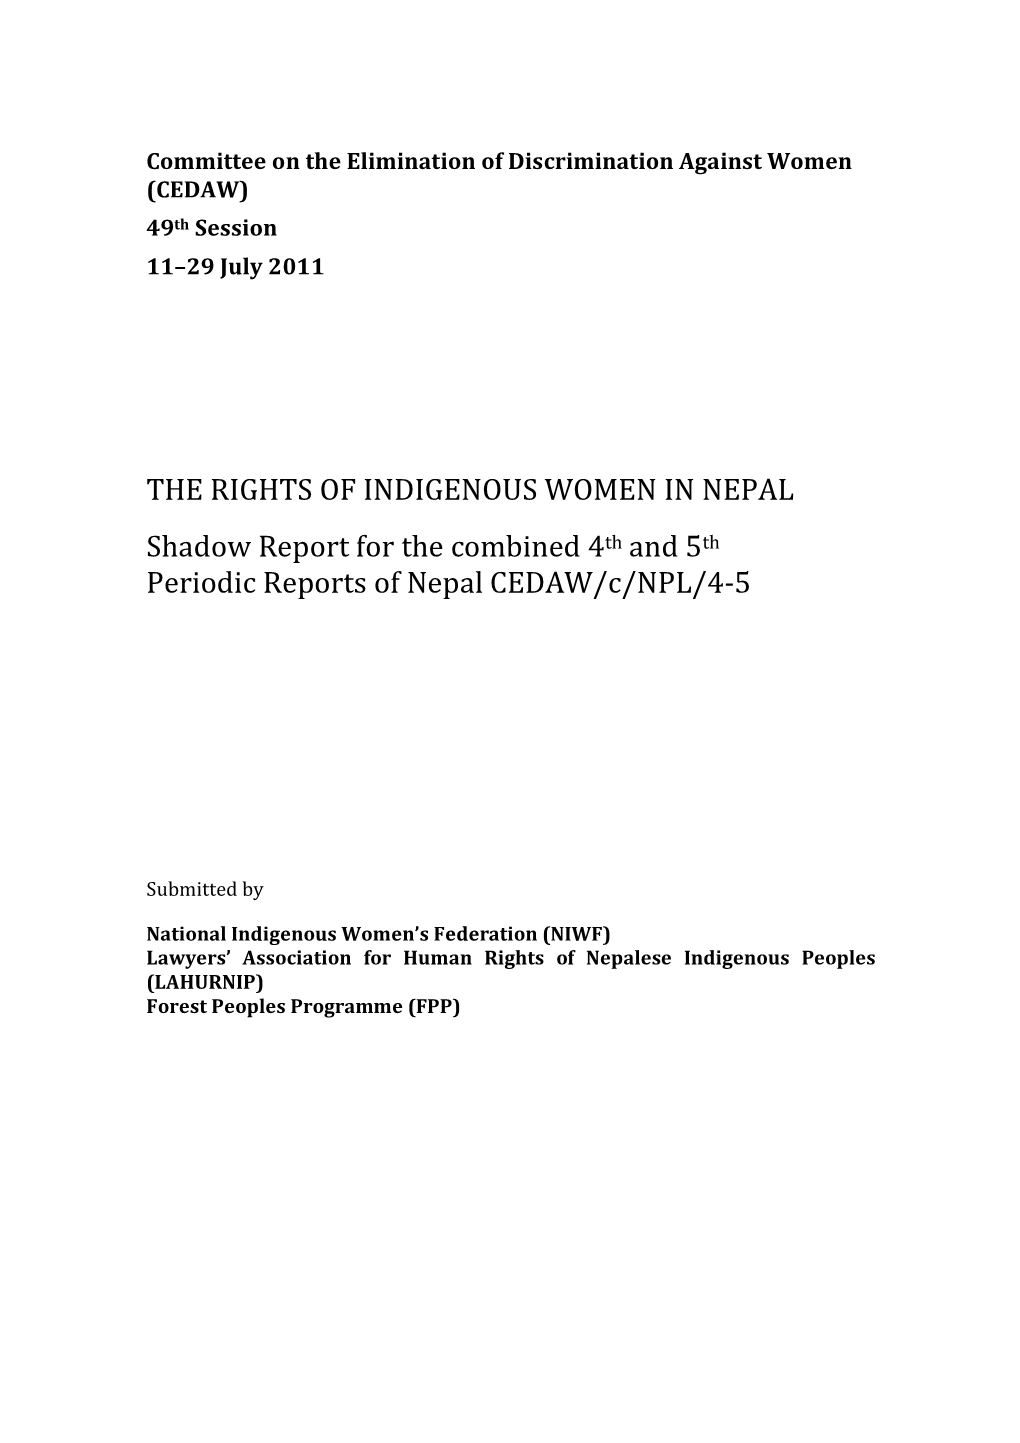 THE RIGHTS of INDIGENOUS WOMEN in NEPAL Shadow Report for the Combined 4Th and 5Th Periodic Reports of Nepal CEDAW/C/NPL/4-5